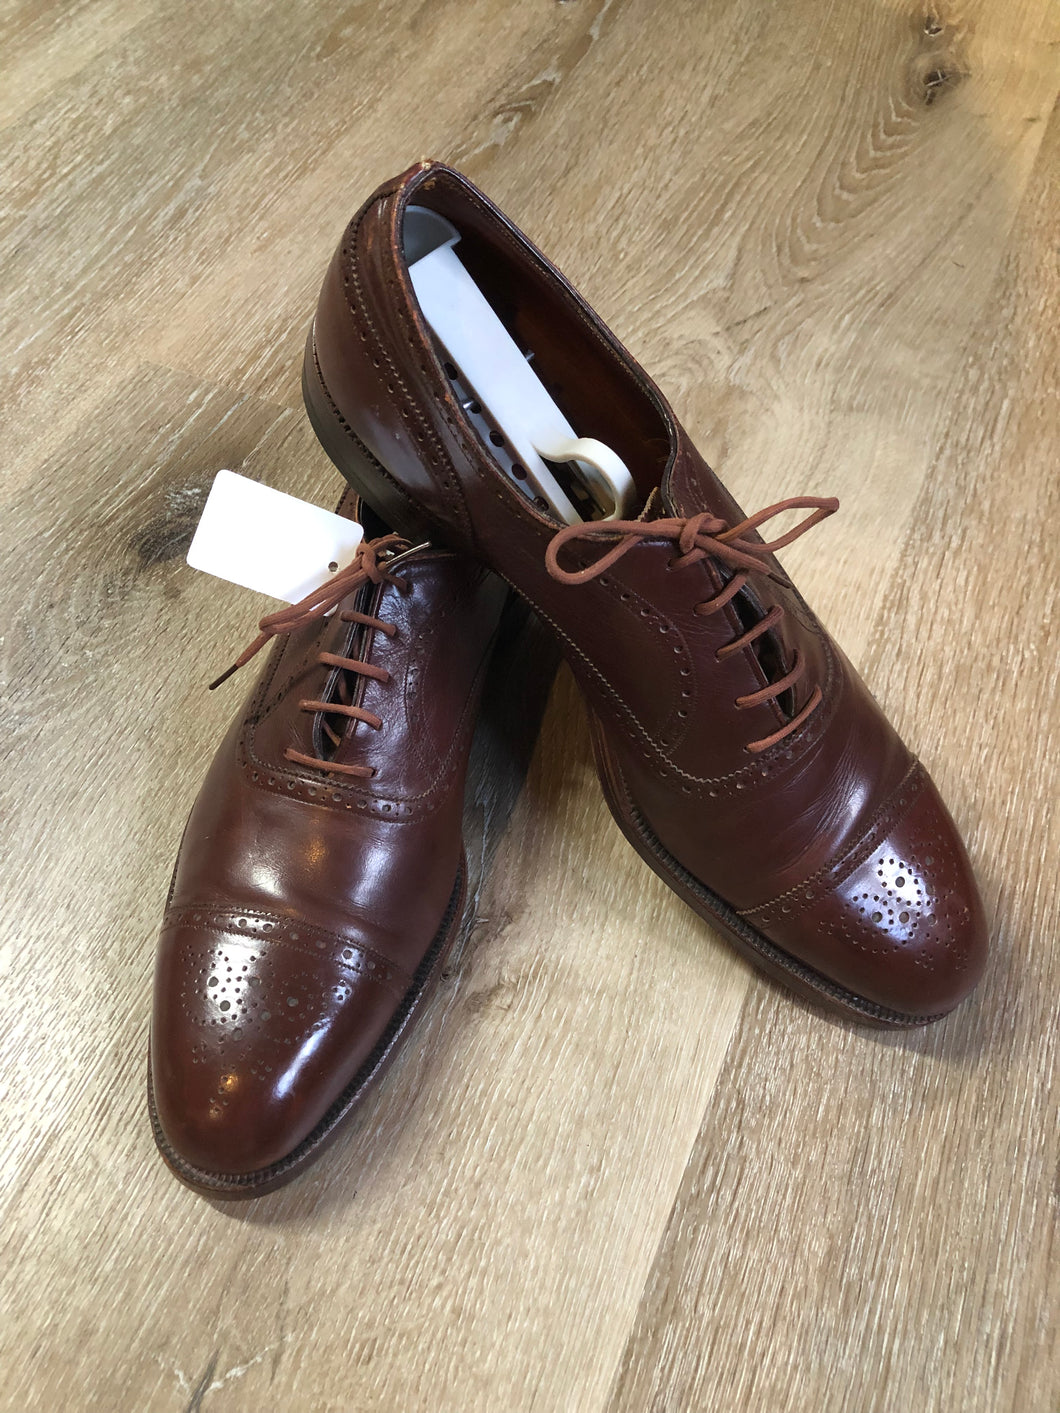 Vintage Sak’s Fifth Avenue brown leather brogue captoe dress shoe with leather sole. Made in Canada.  Size 9.5M US/ 43 EUR